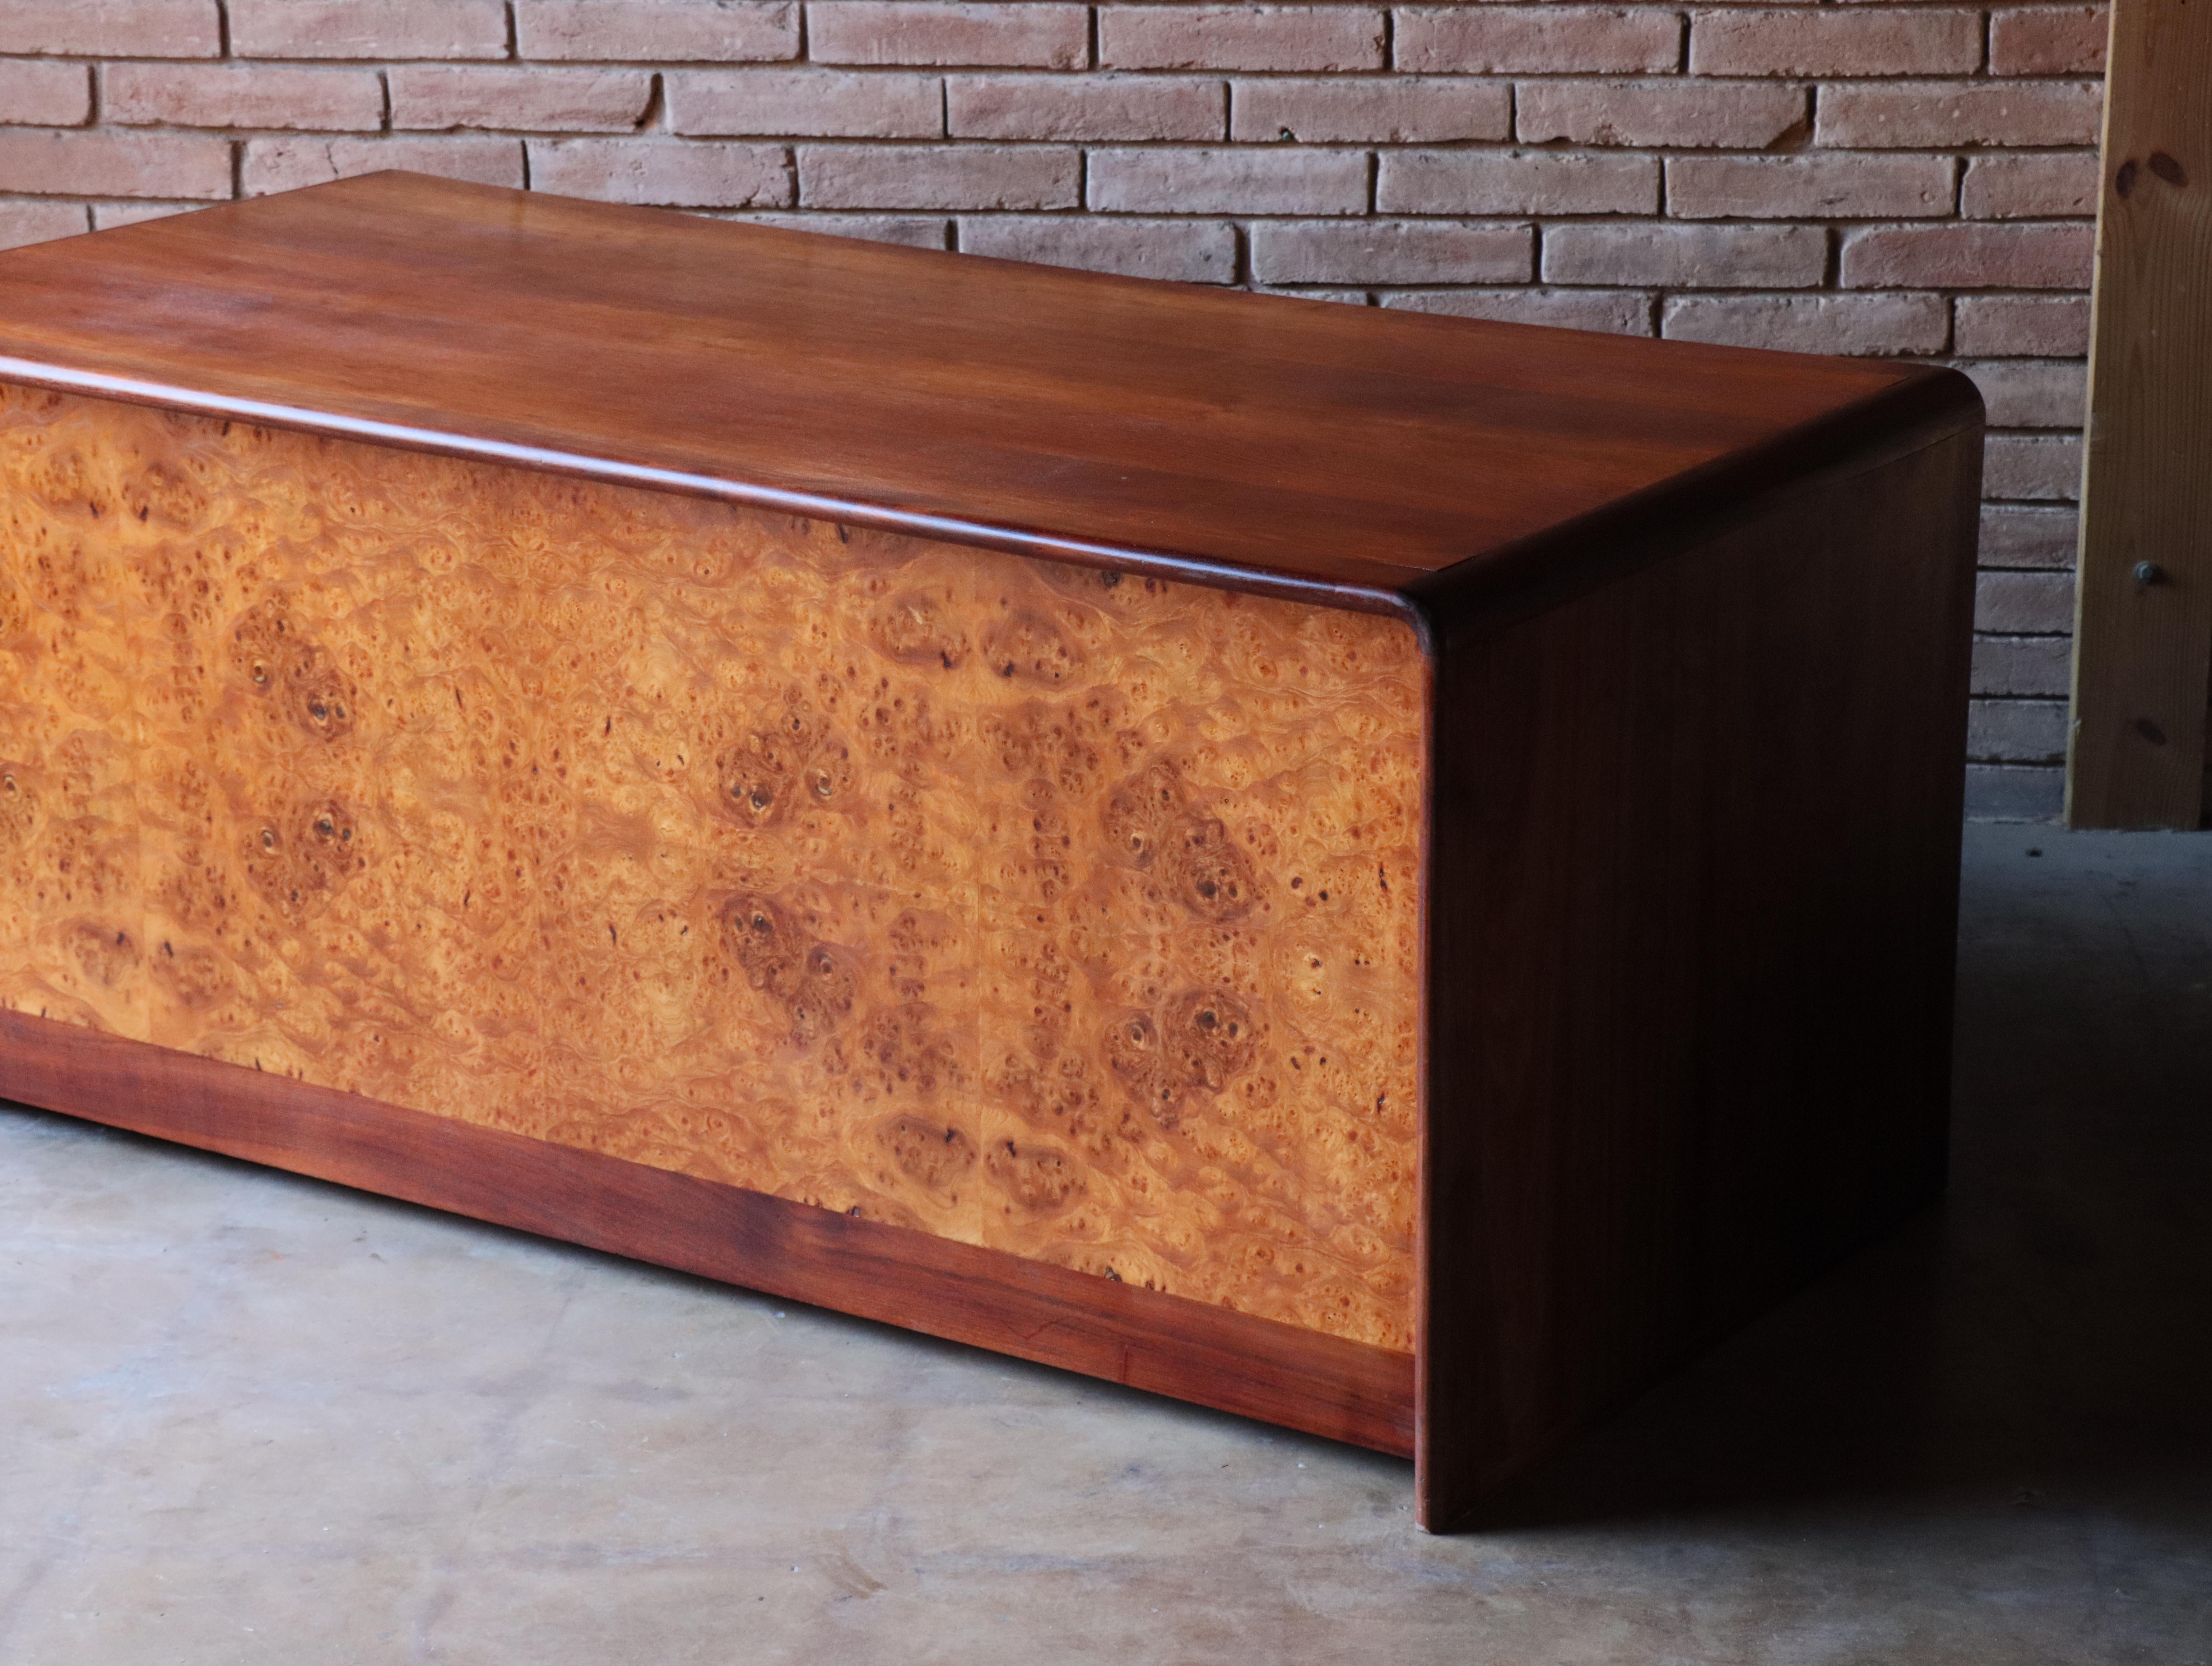 Solid Walnut and Burlwood Desk by Lou Hodges, California Design, 1970s For Sale 1